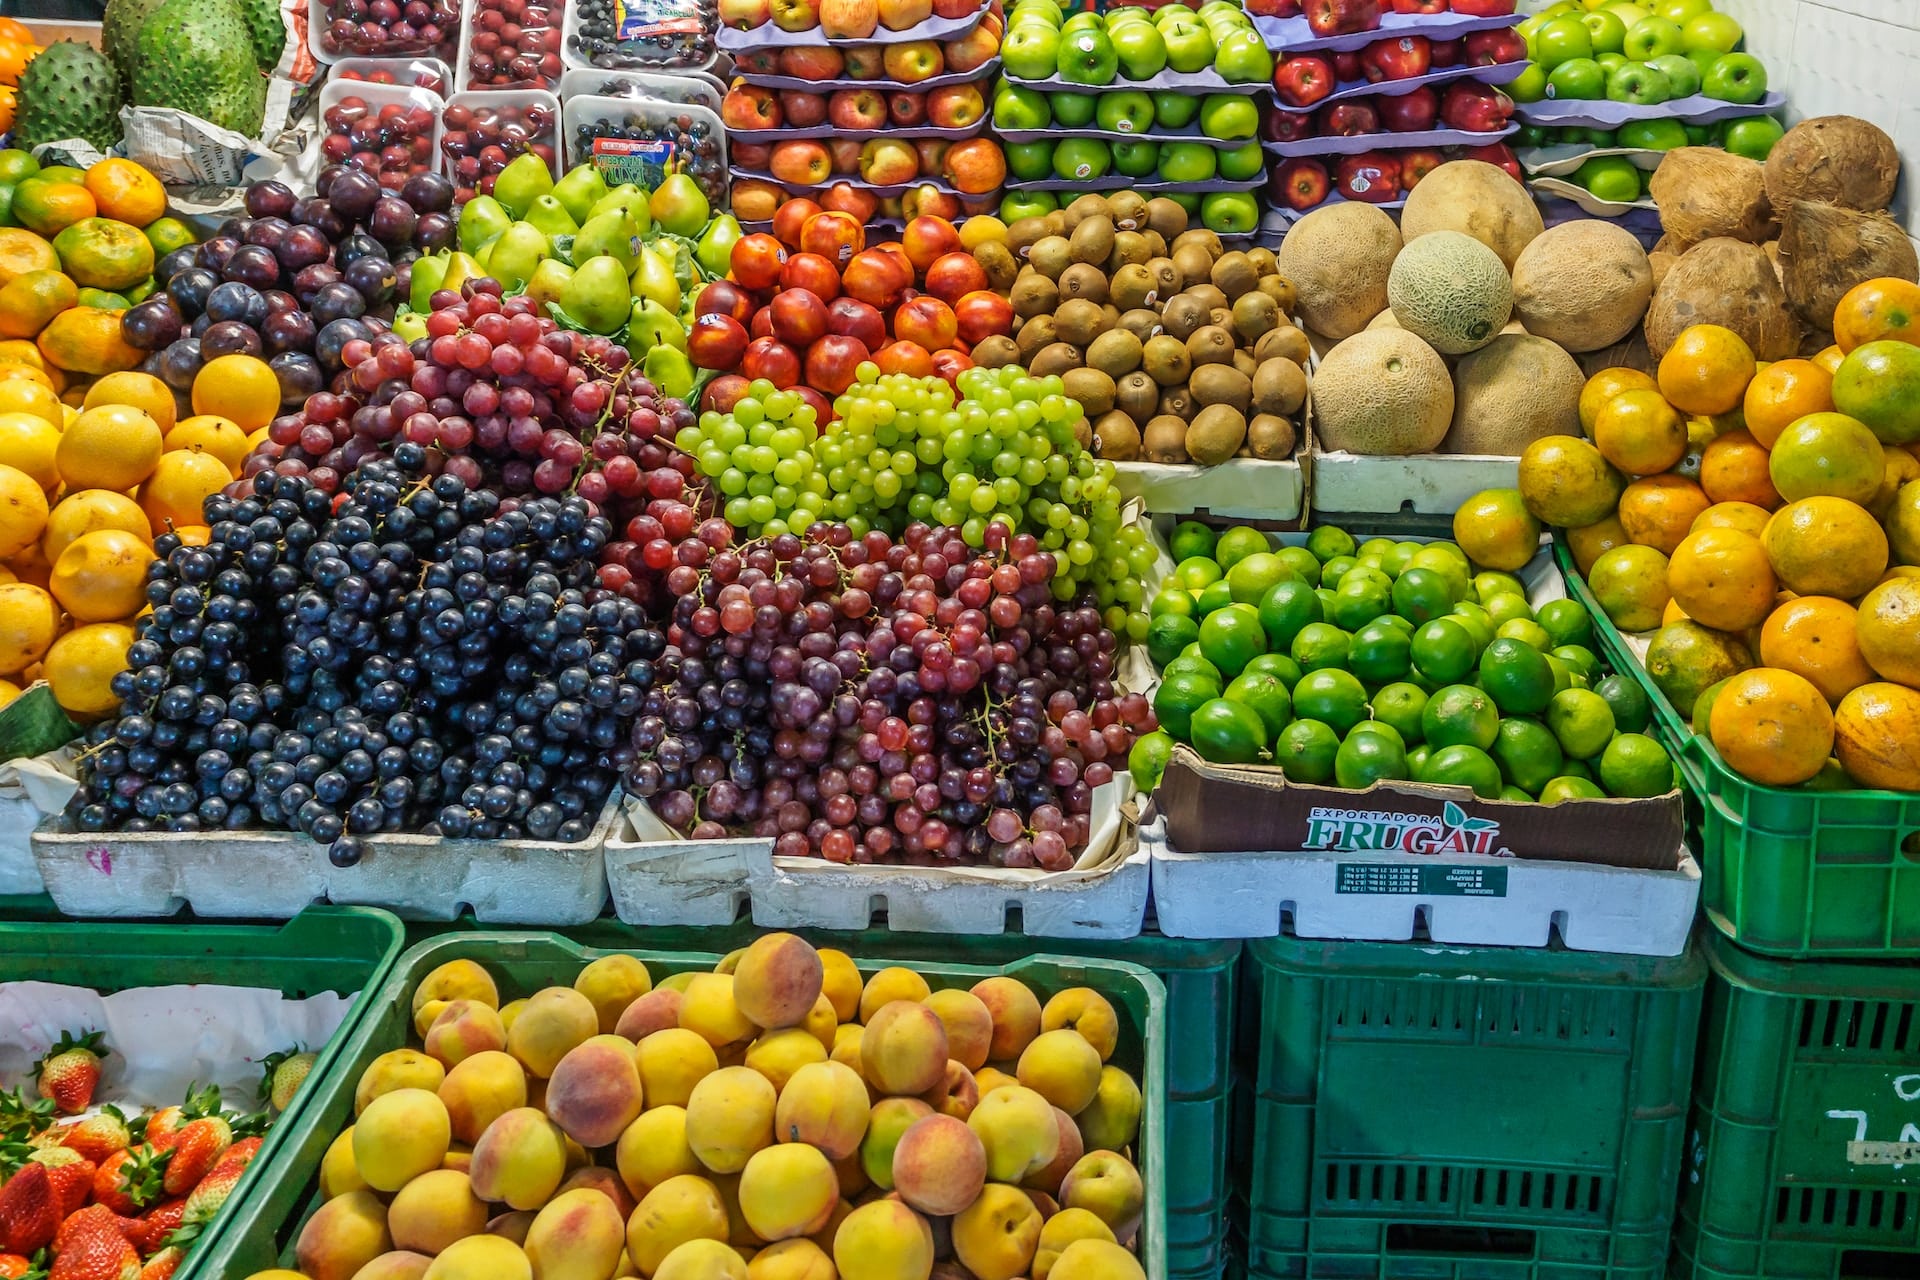 colorful fruit in bins and crates -food stamp fraud